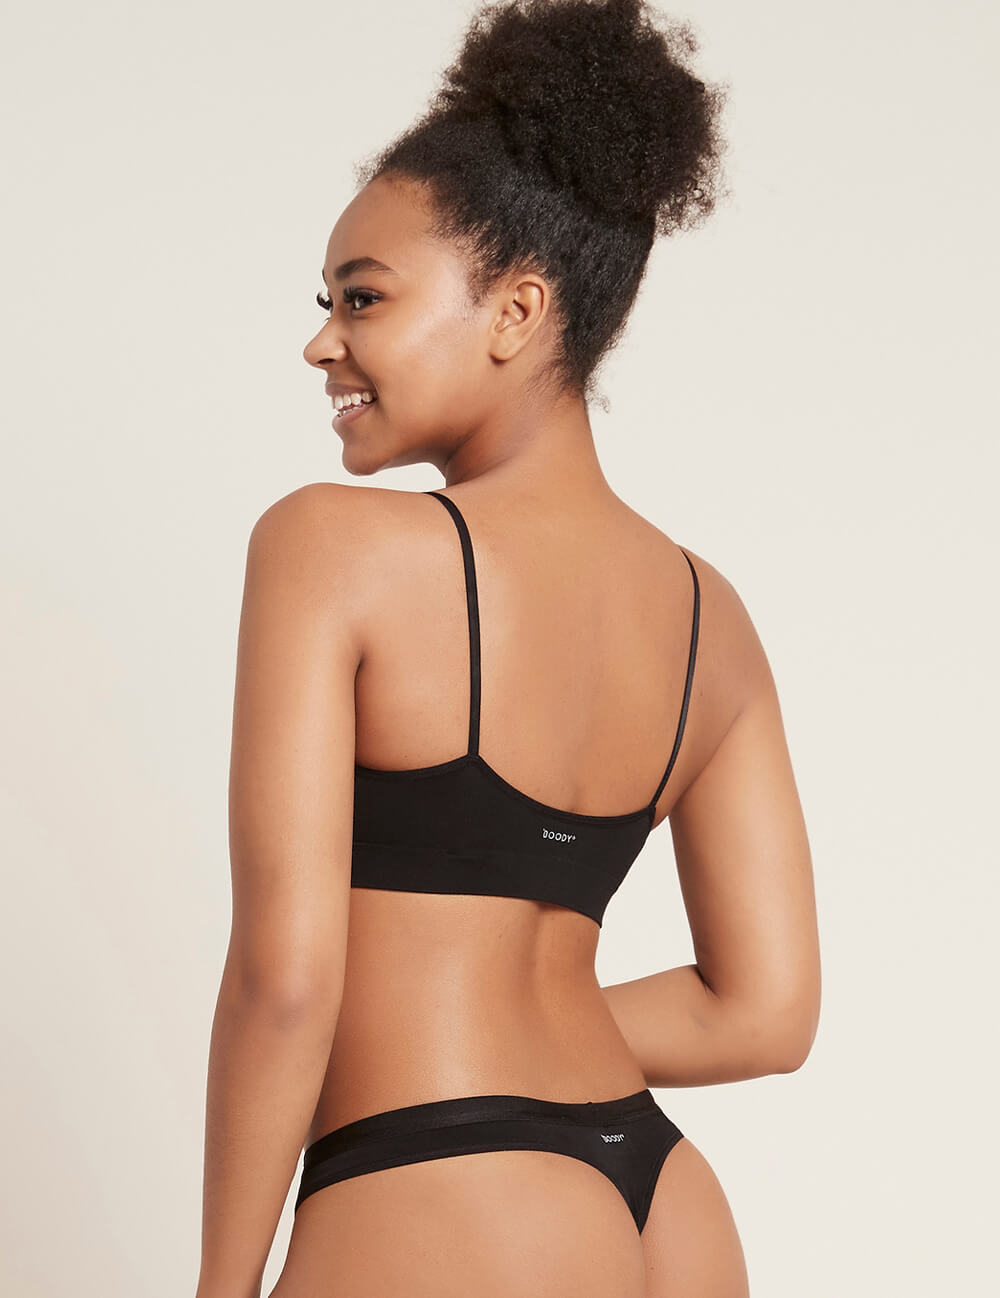 Boody Bamboo LYOLYTE Triangle Bralette in Black Back View